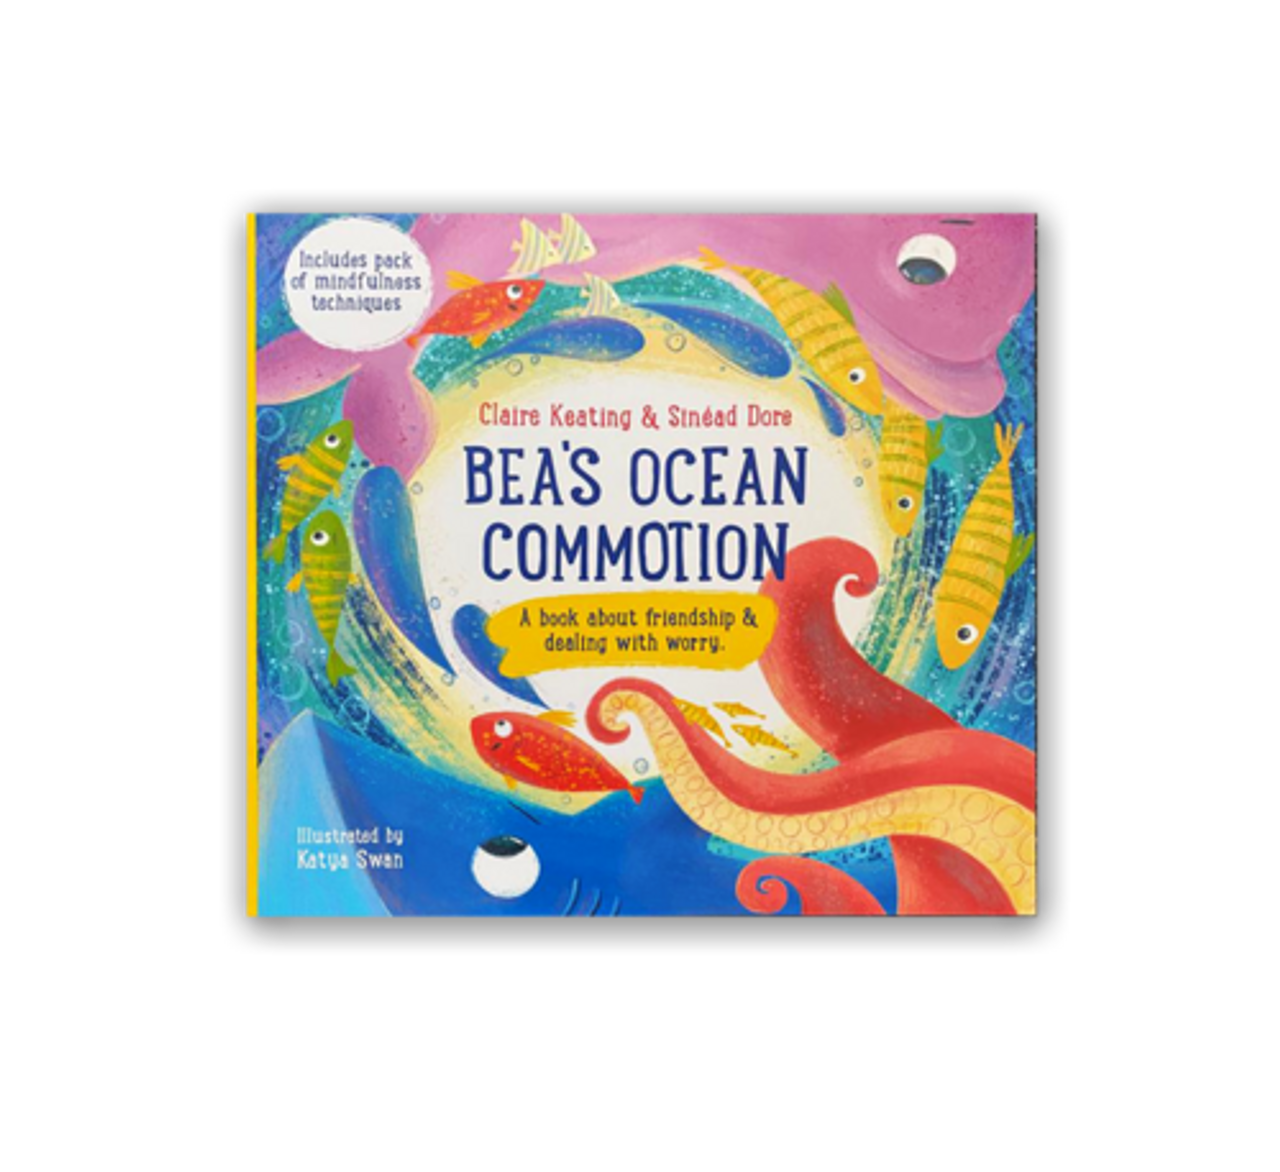 Claire Keating & Sinéad Dore  - Breathe With Bea SERIES - 3 BOOK PB SET - Bea's Ocean Commotion,  Bea's Jungle Rumble, Bea's Polar Express SOS - BRAND NEW PB